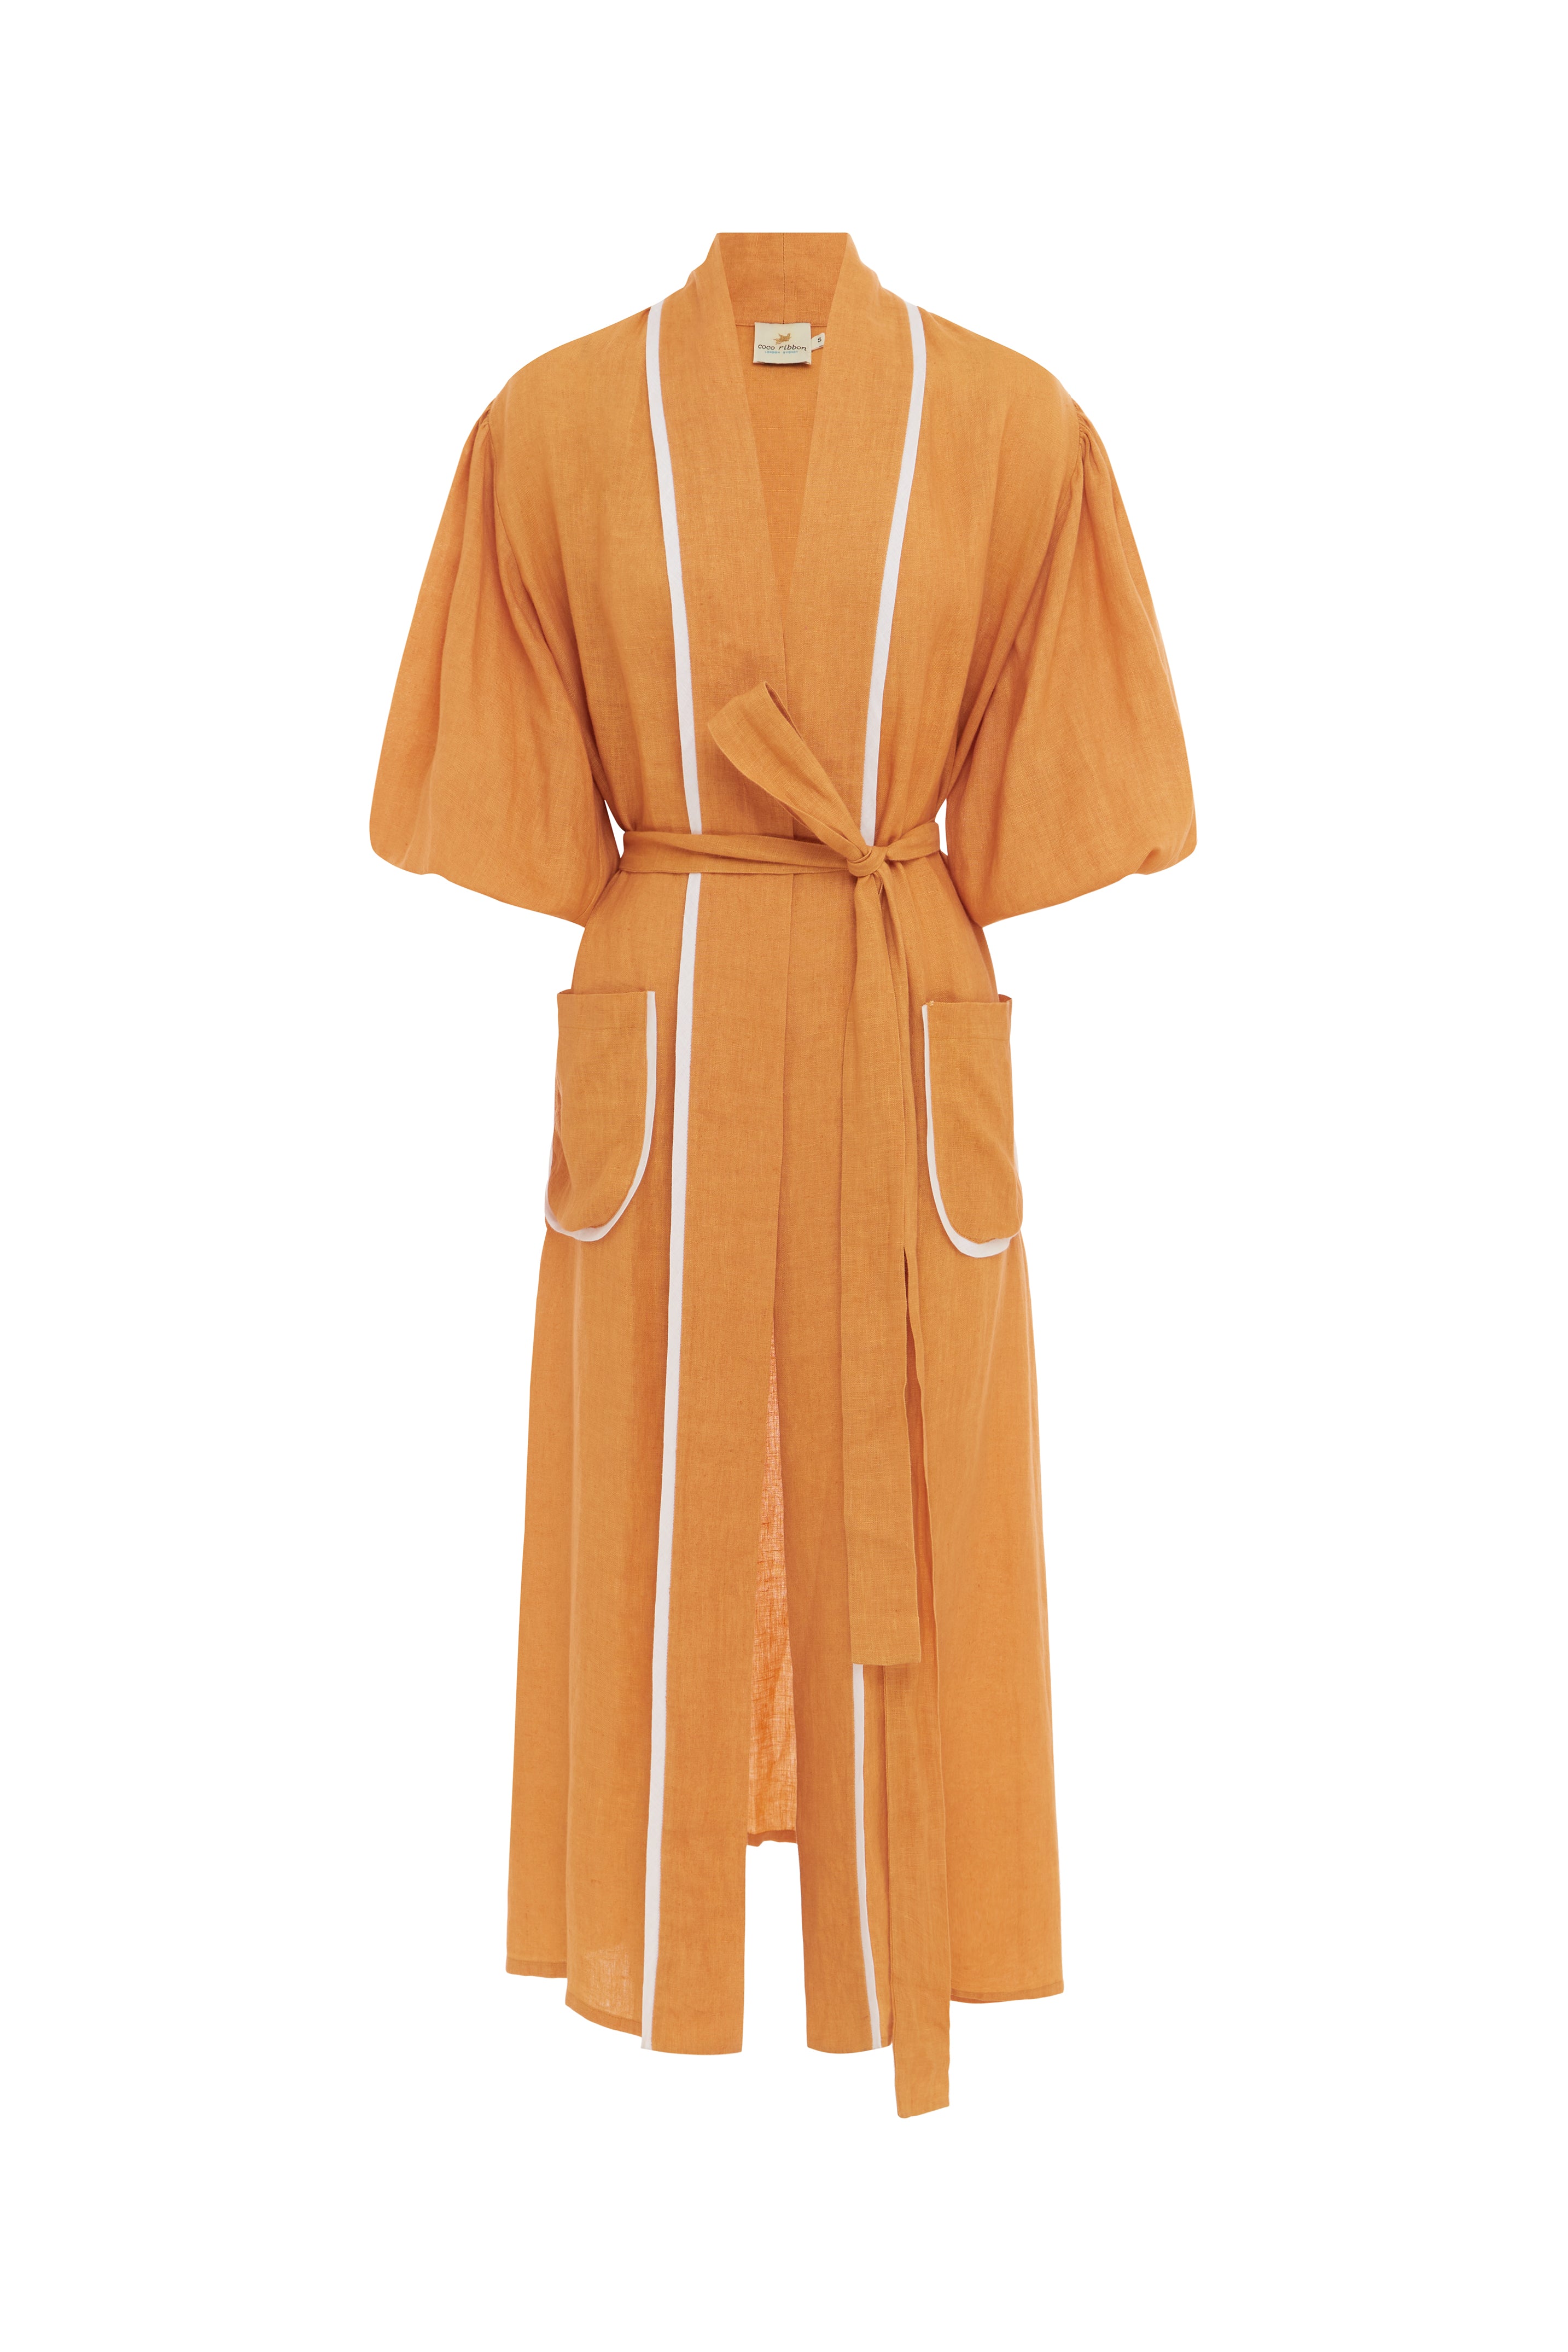 Cape Amarin Long Beach-to-Bar Robe in Solid Toffee